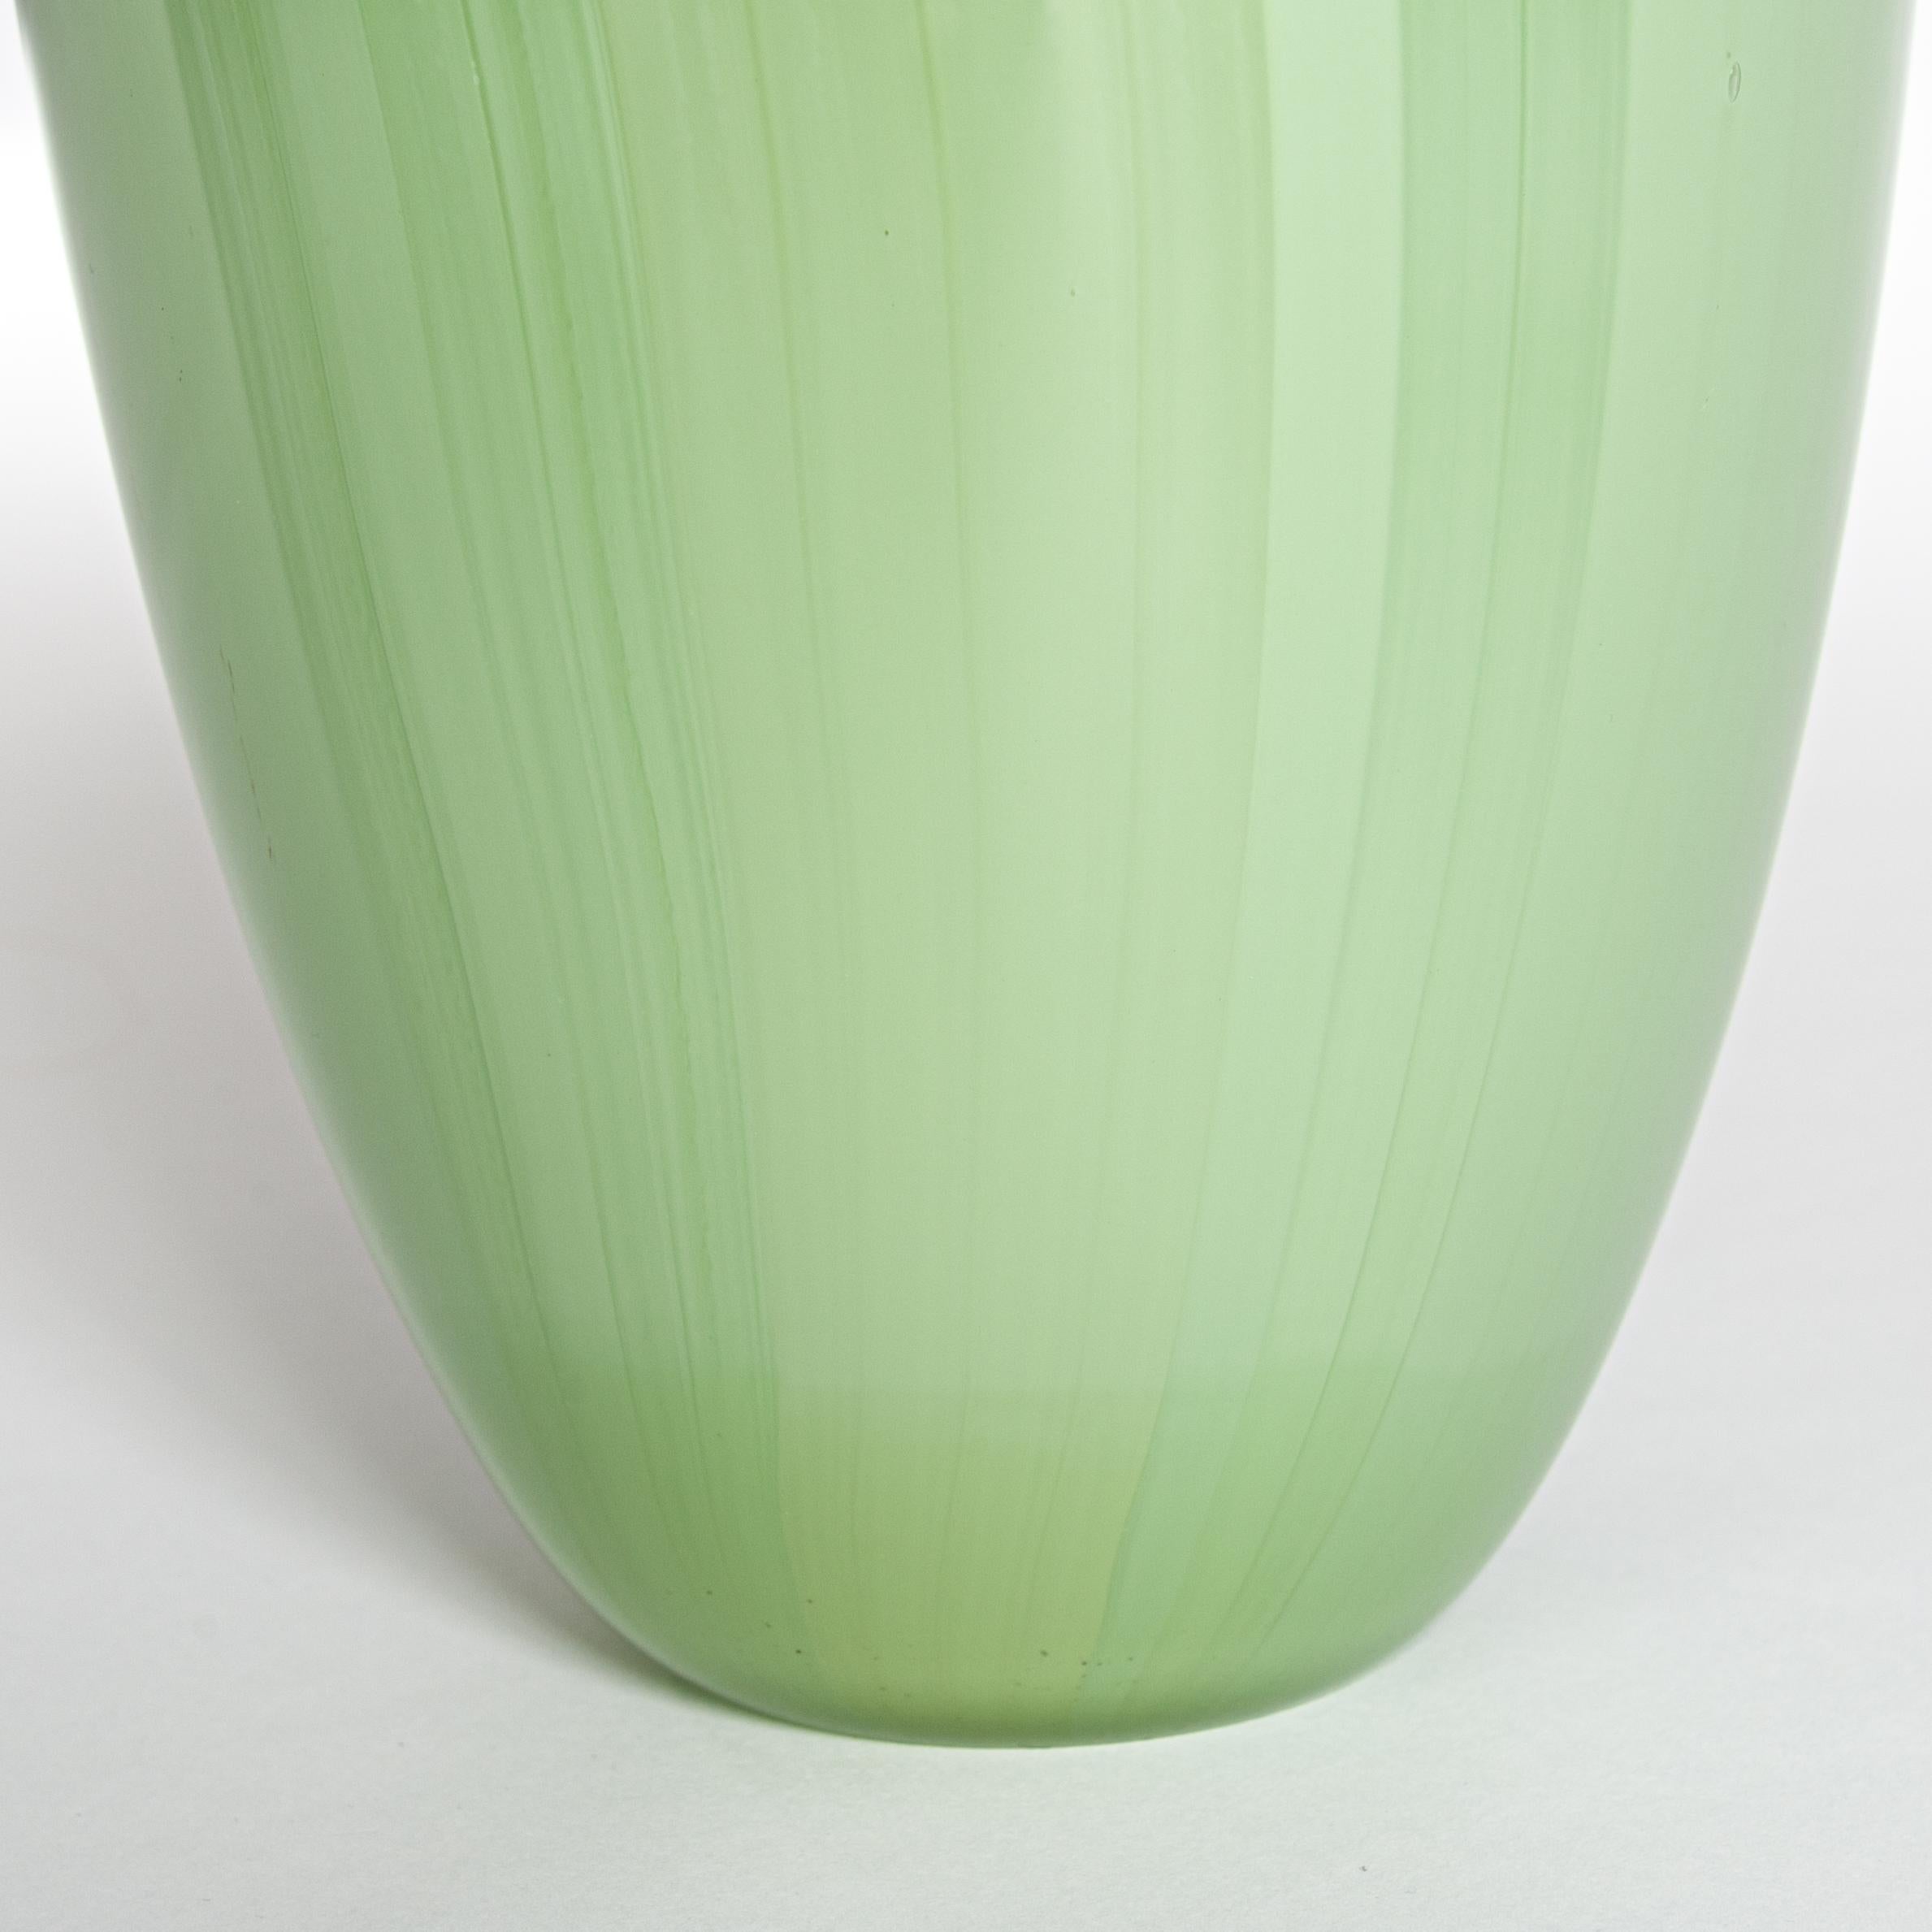 Italian Modern Lime Green Murano Glass Vase with Murrines, Signed Afro Celotto 1